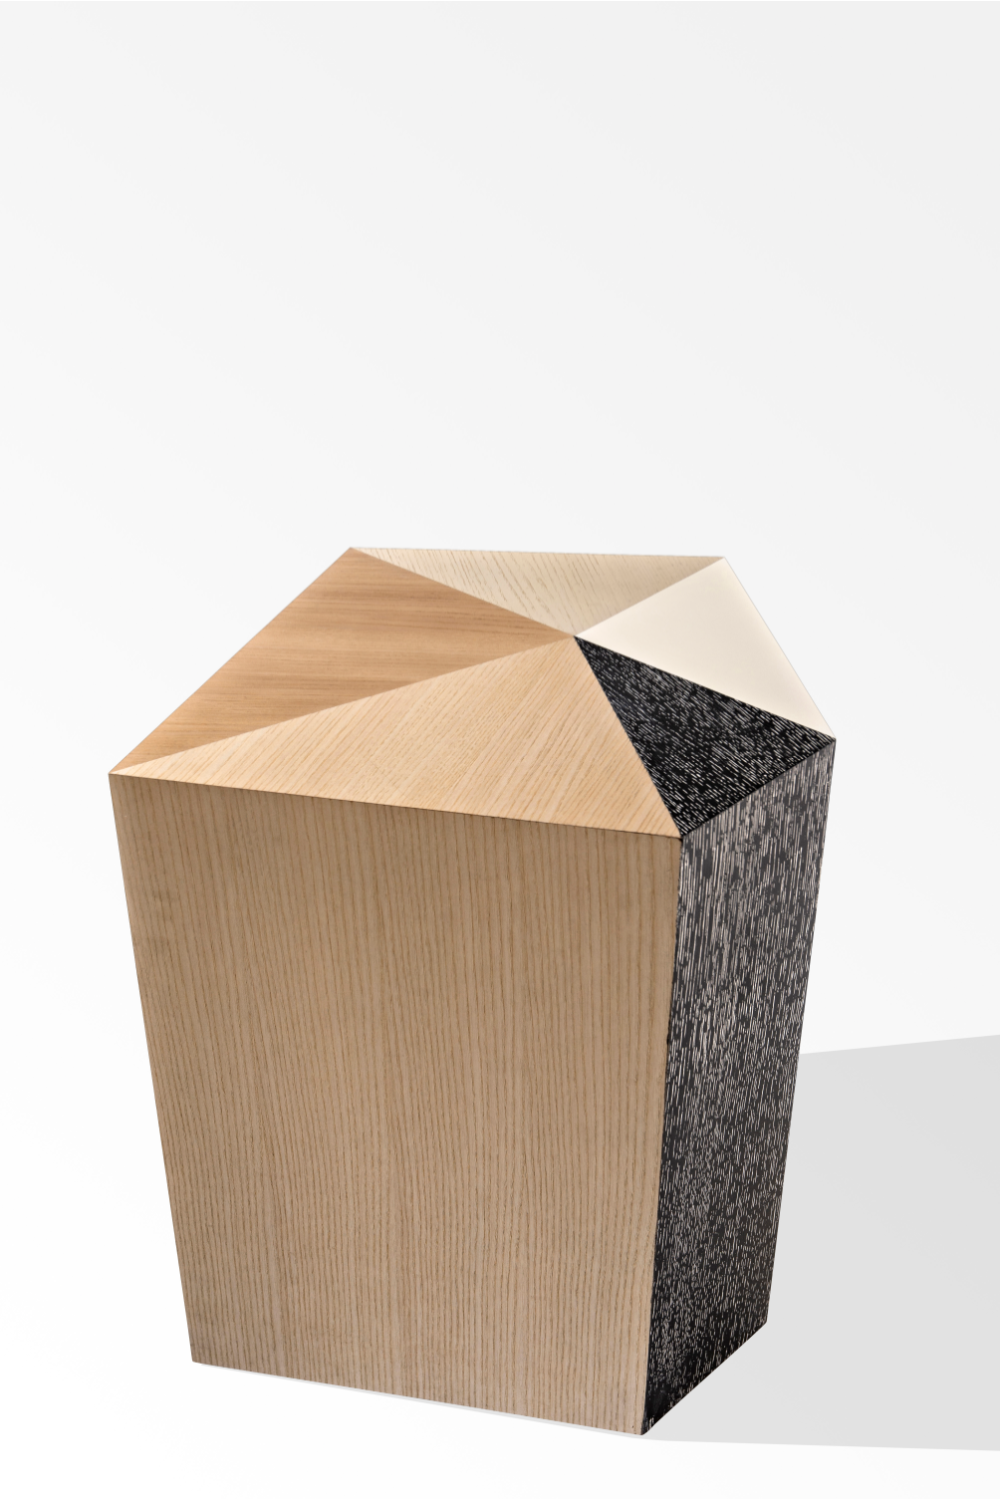 Multicolored Wooden Accent Table | Andrew Martin Vincent  | OROA